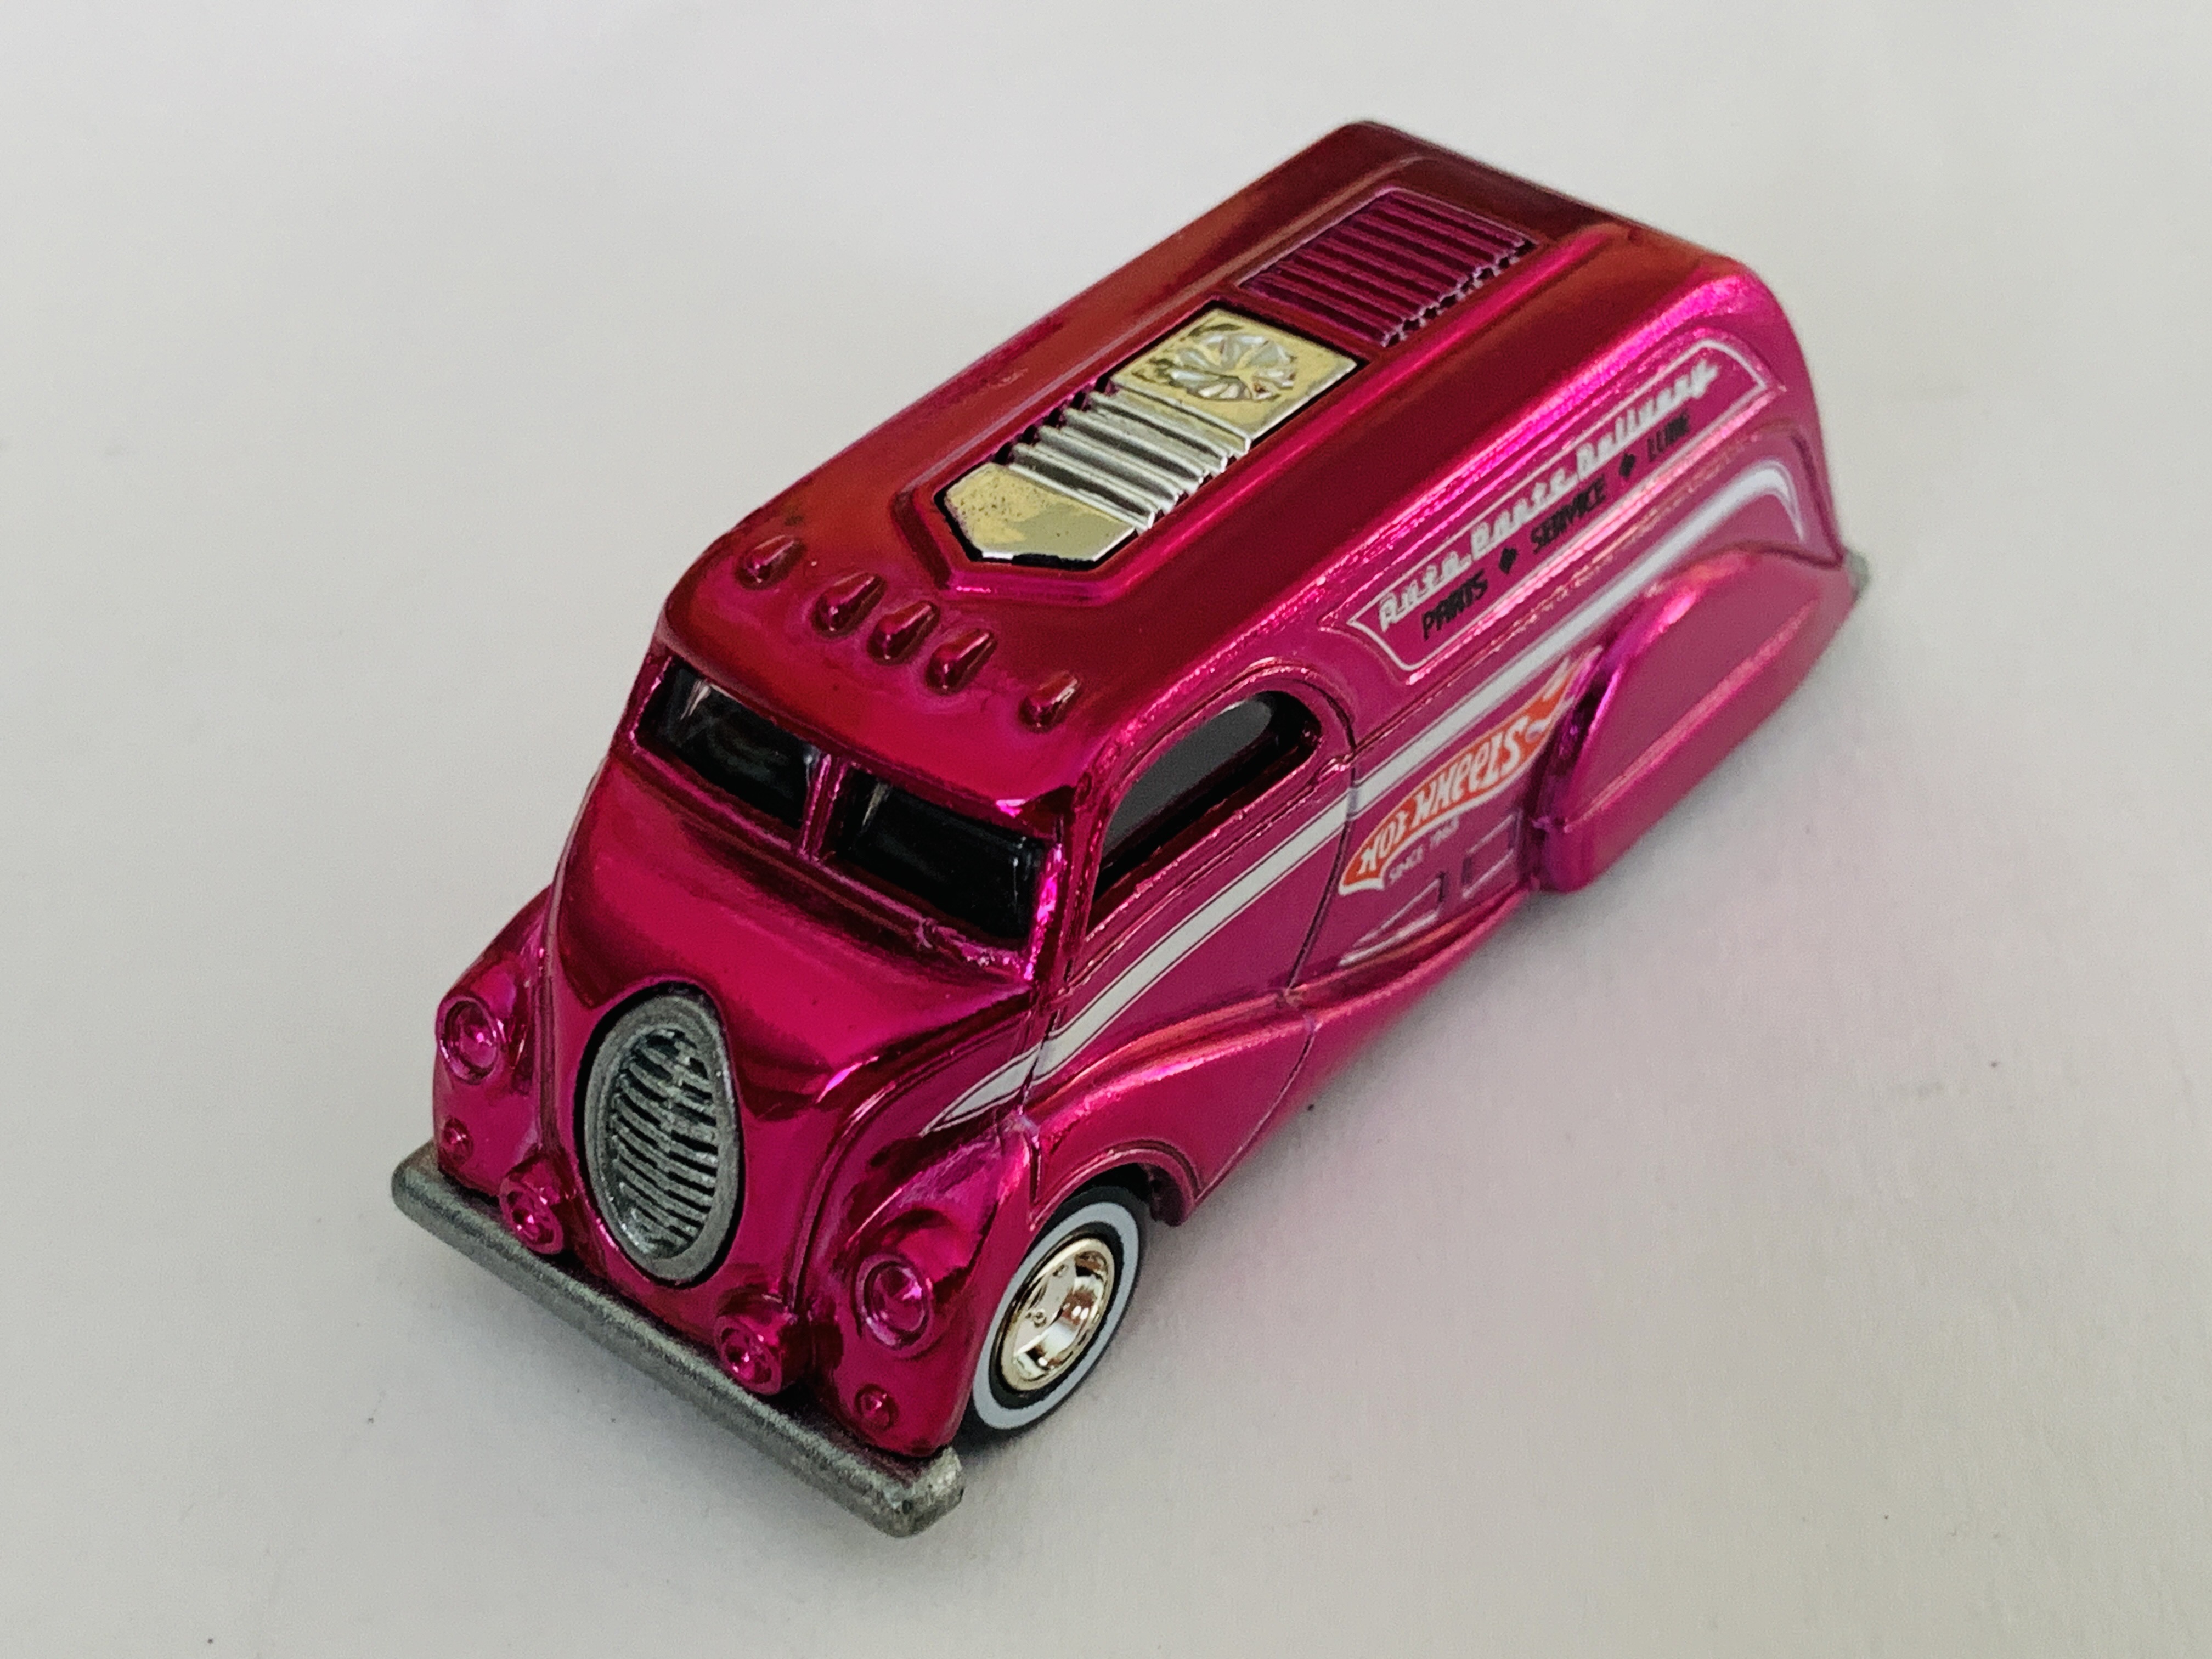 Hot Wheels Classics Series 5 Chase Deco Delivery